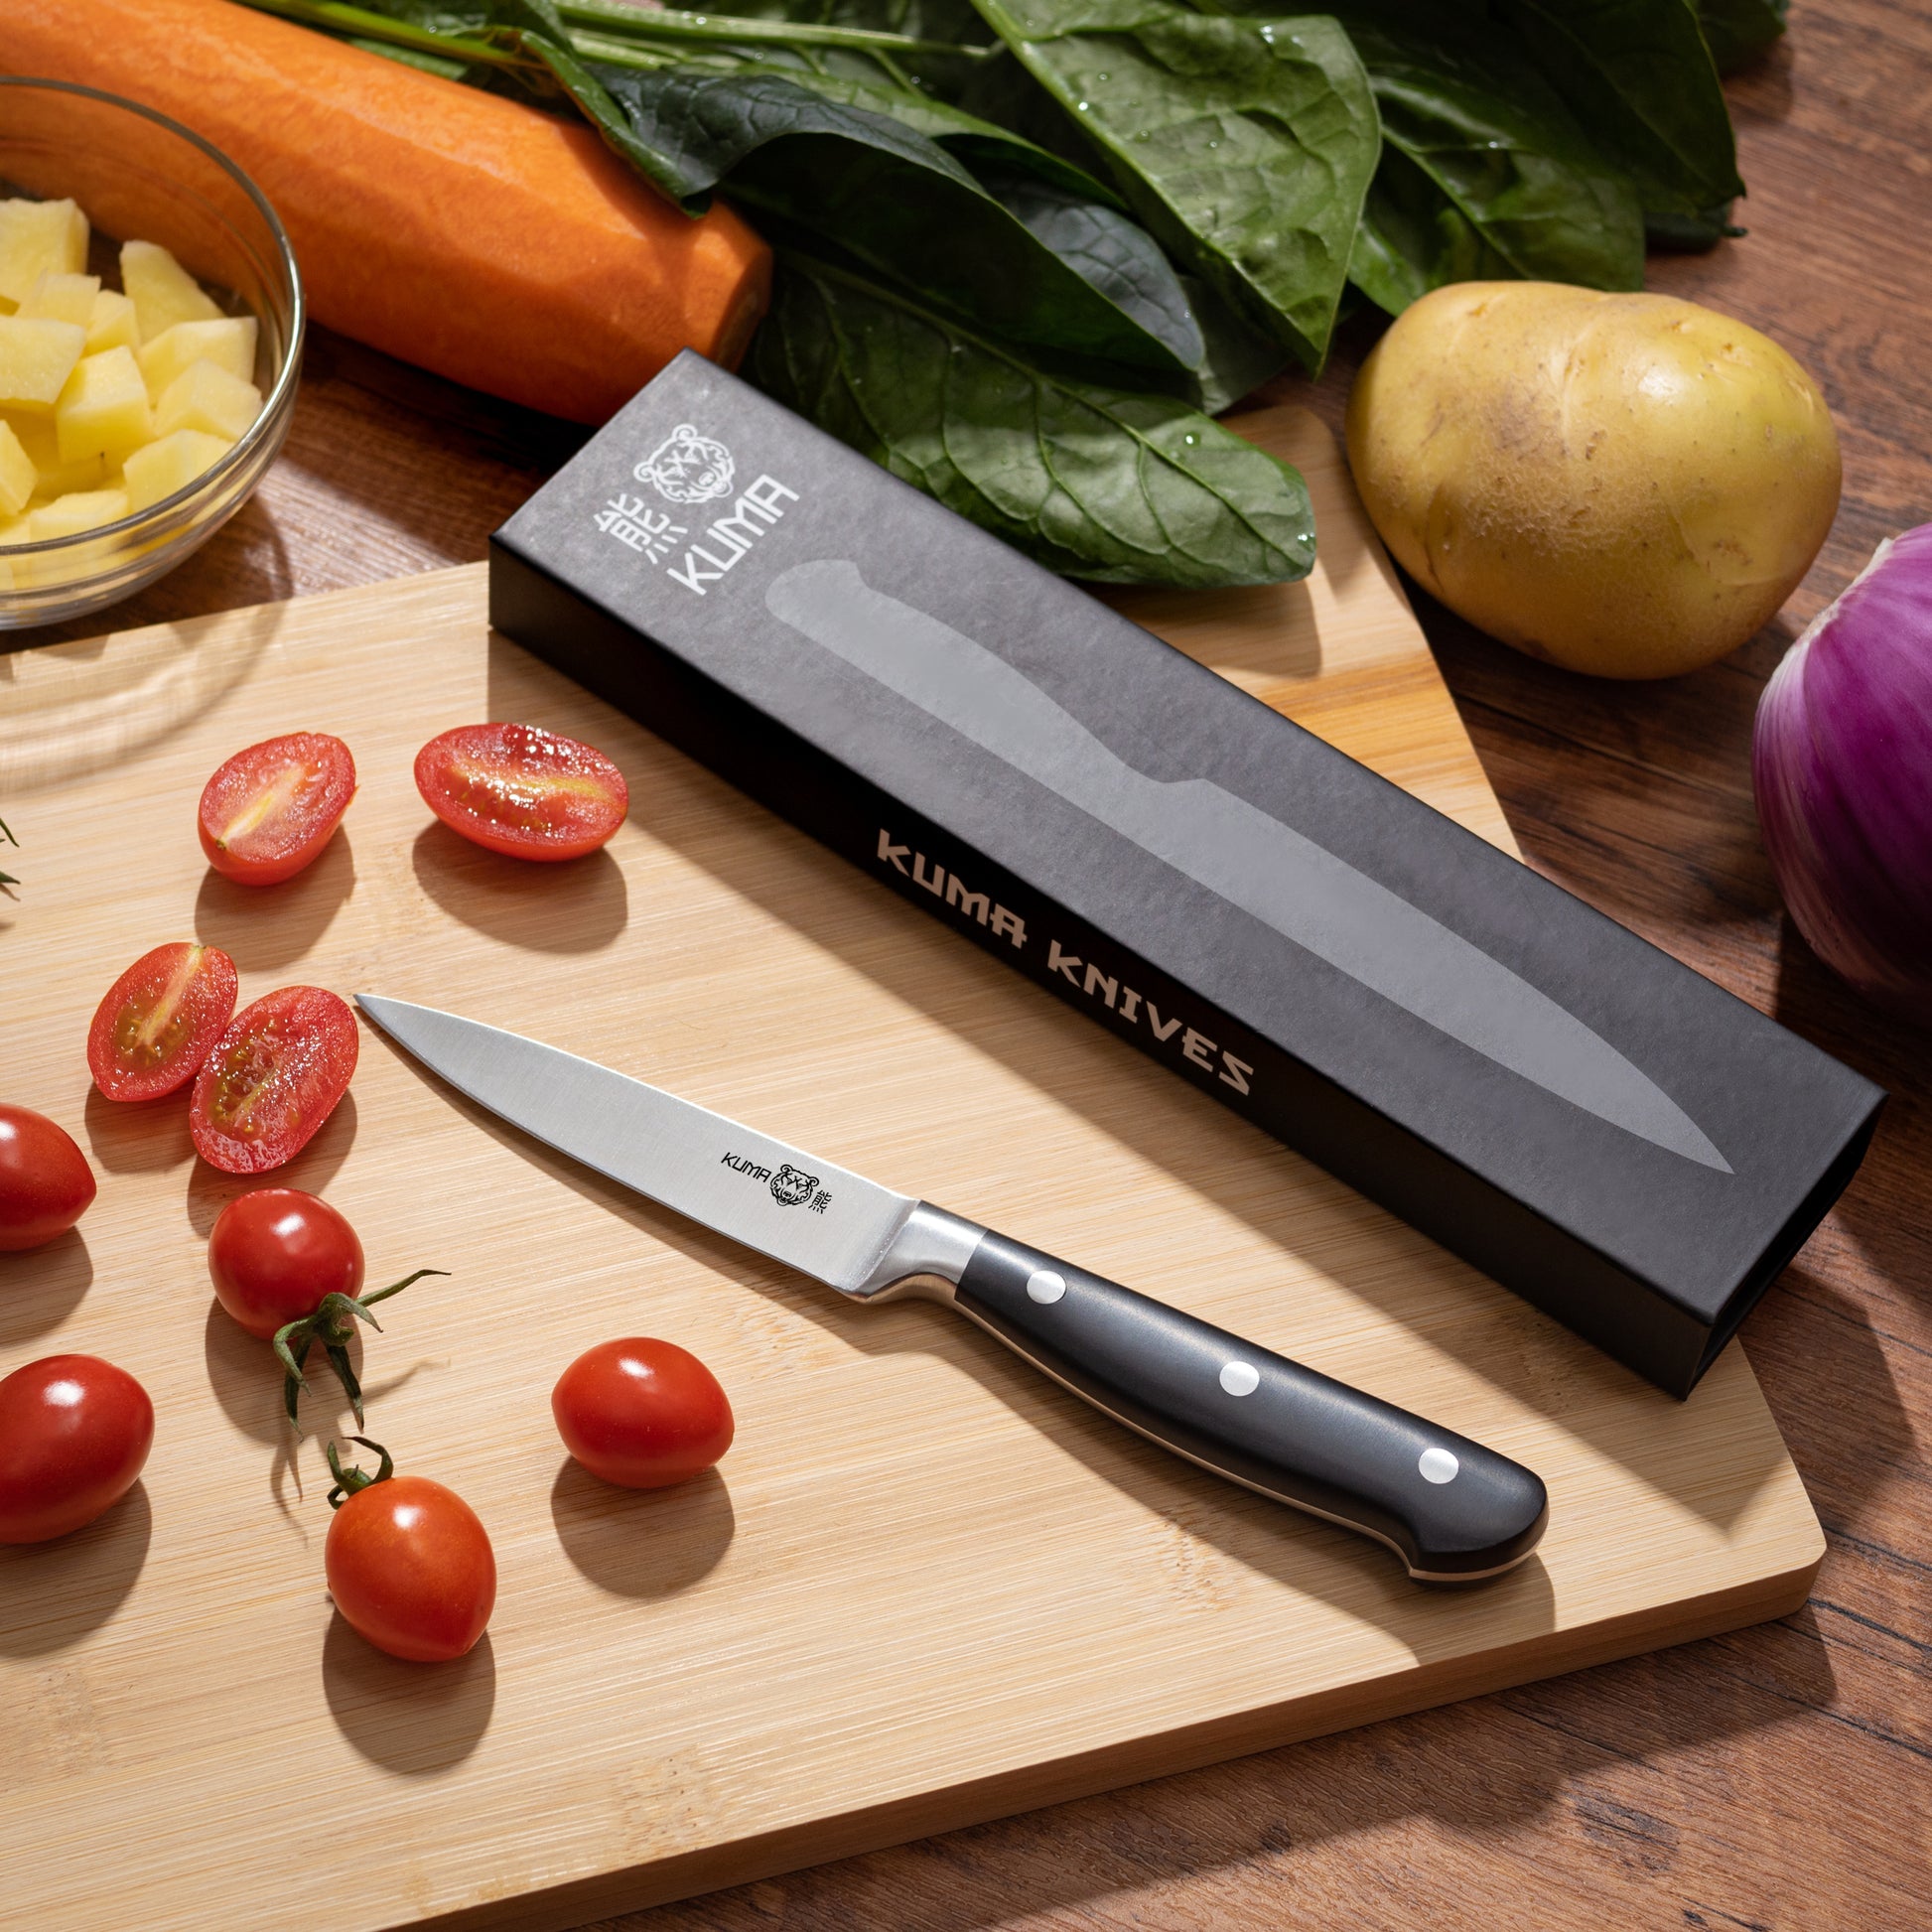 Cutco Cutlery  Best Small Paring Knives 